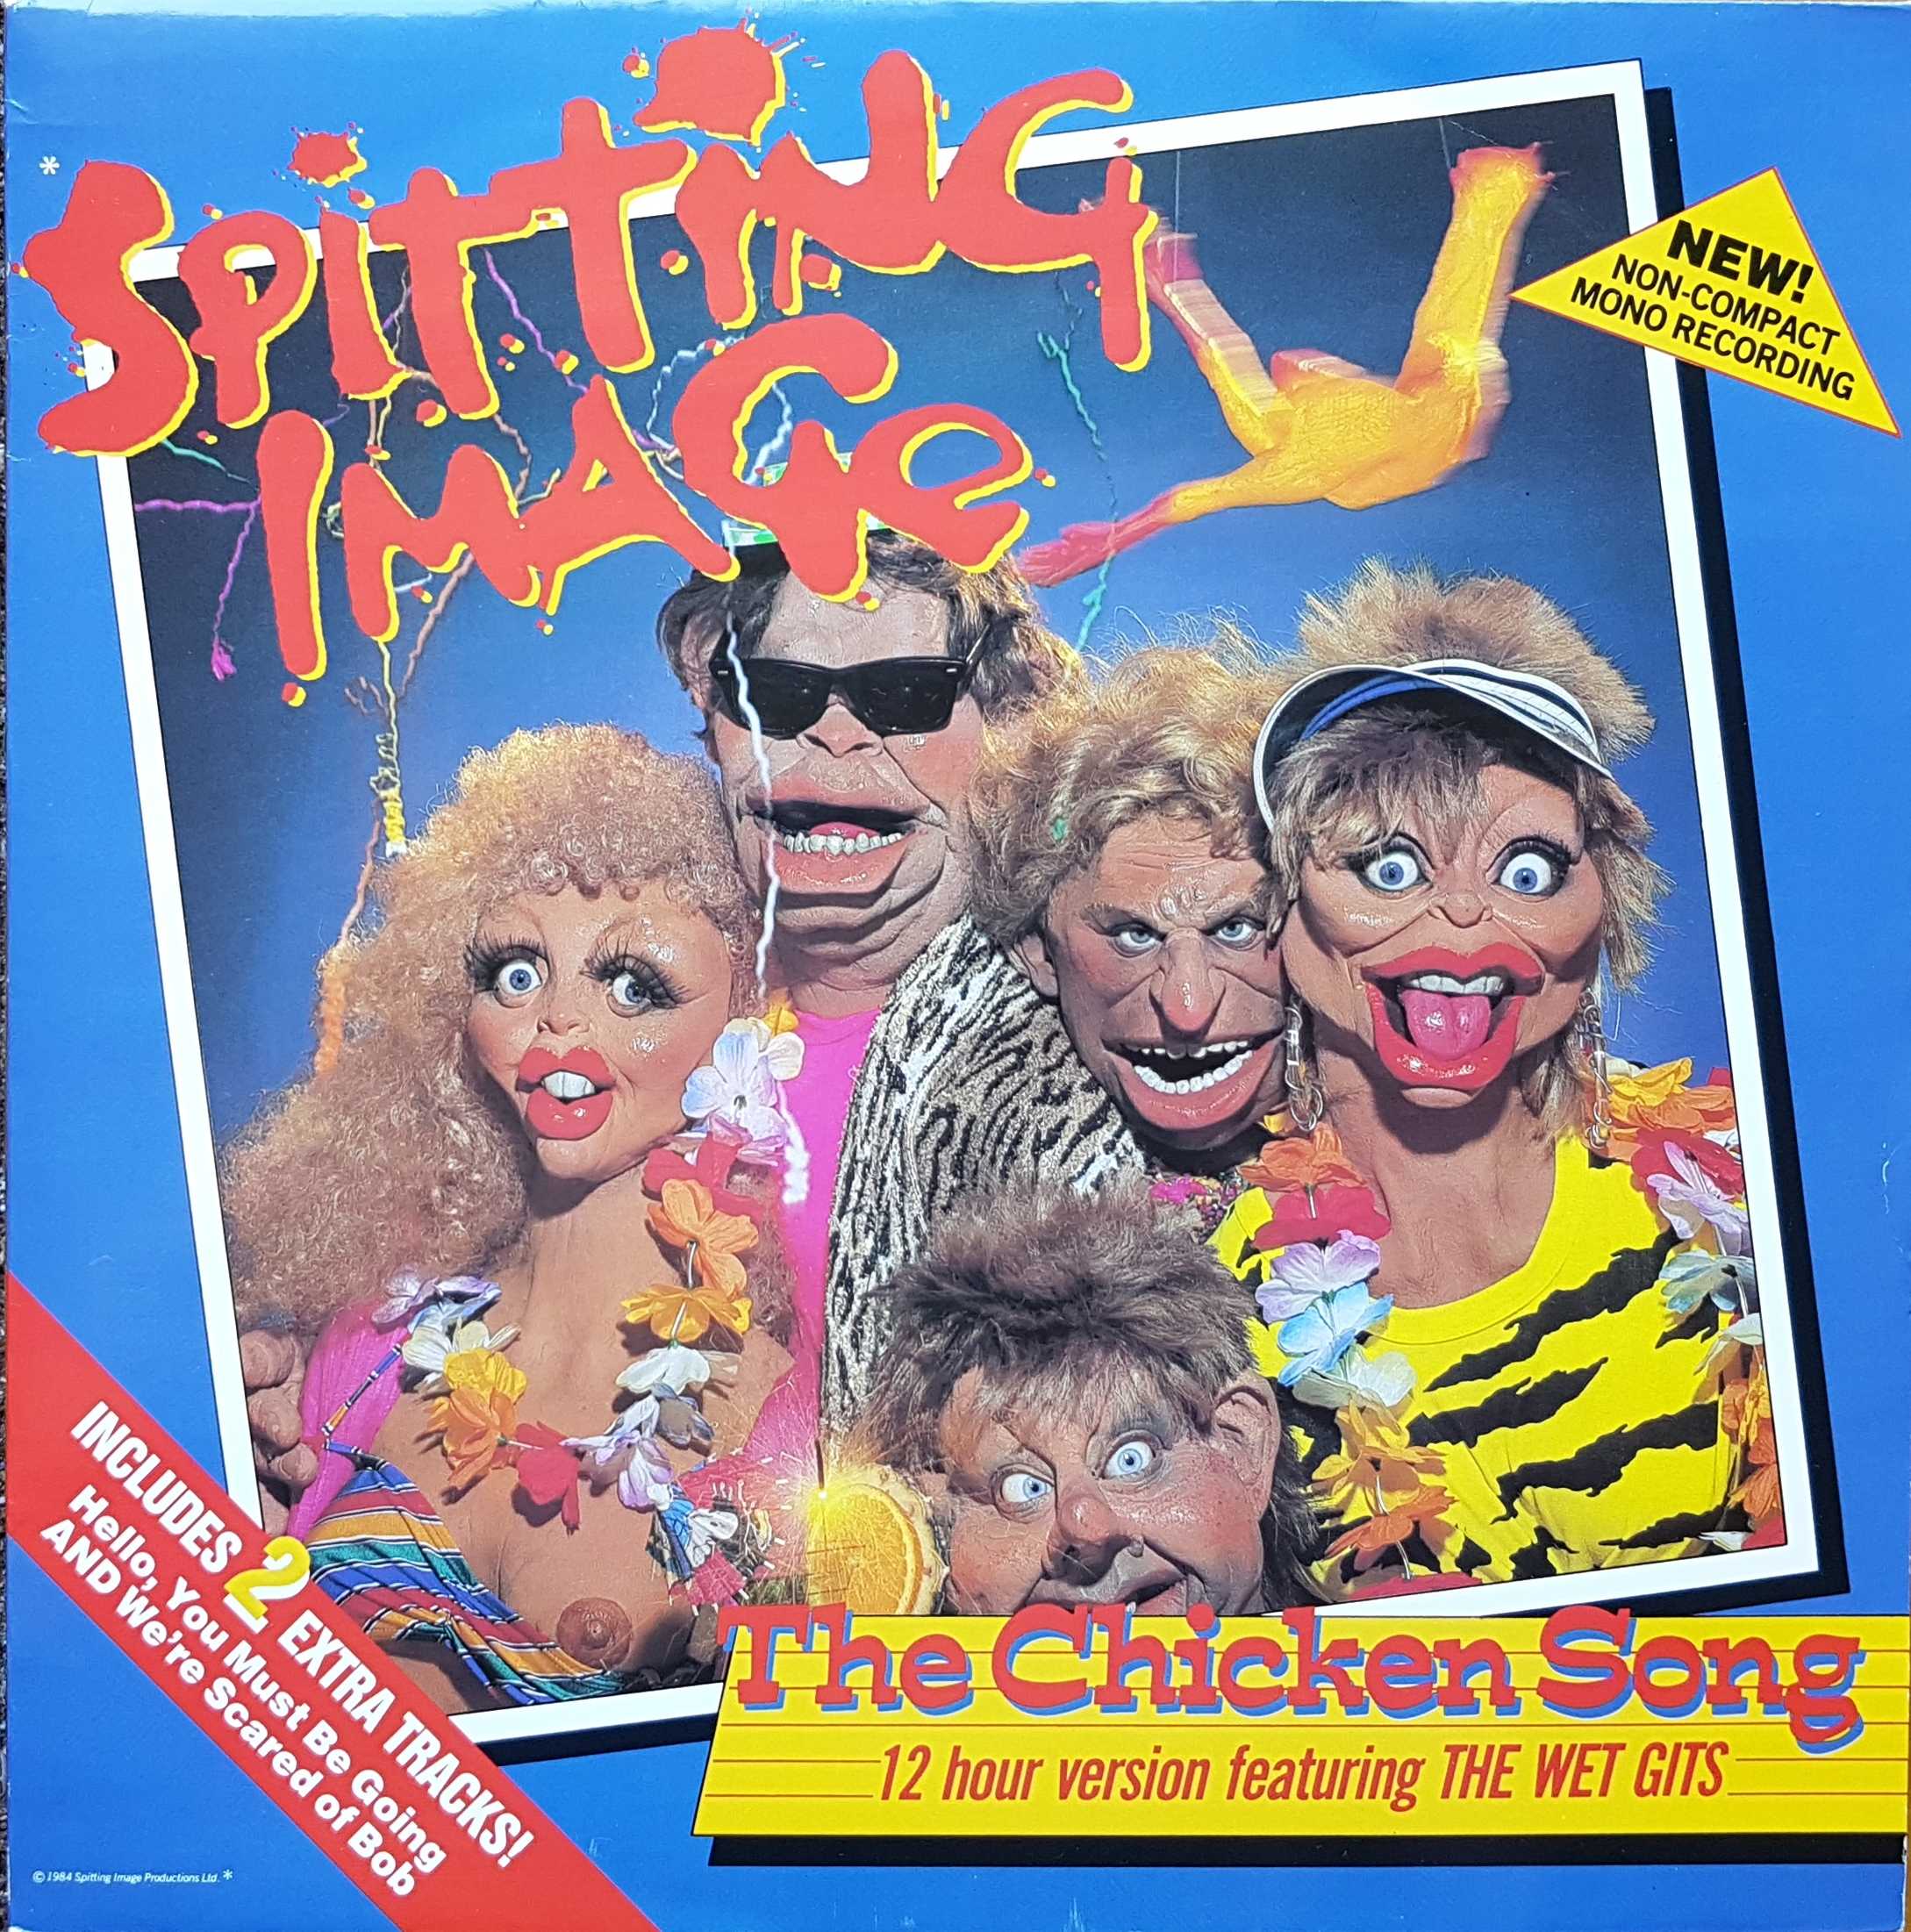 Picture of SPIT 112 The chicken song (Spitting image) by artist Pope / Grant / Naylor from ITV, Channel 4 and Channel 5 12inches library